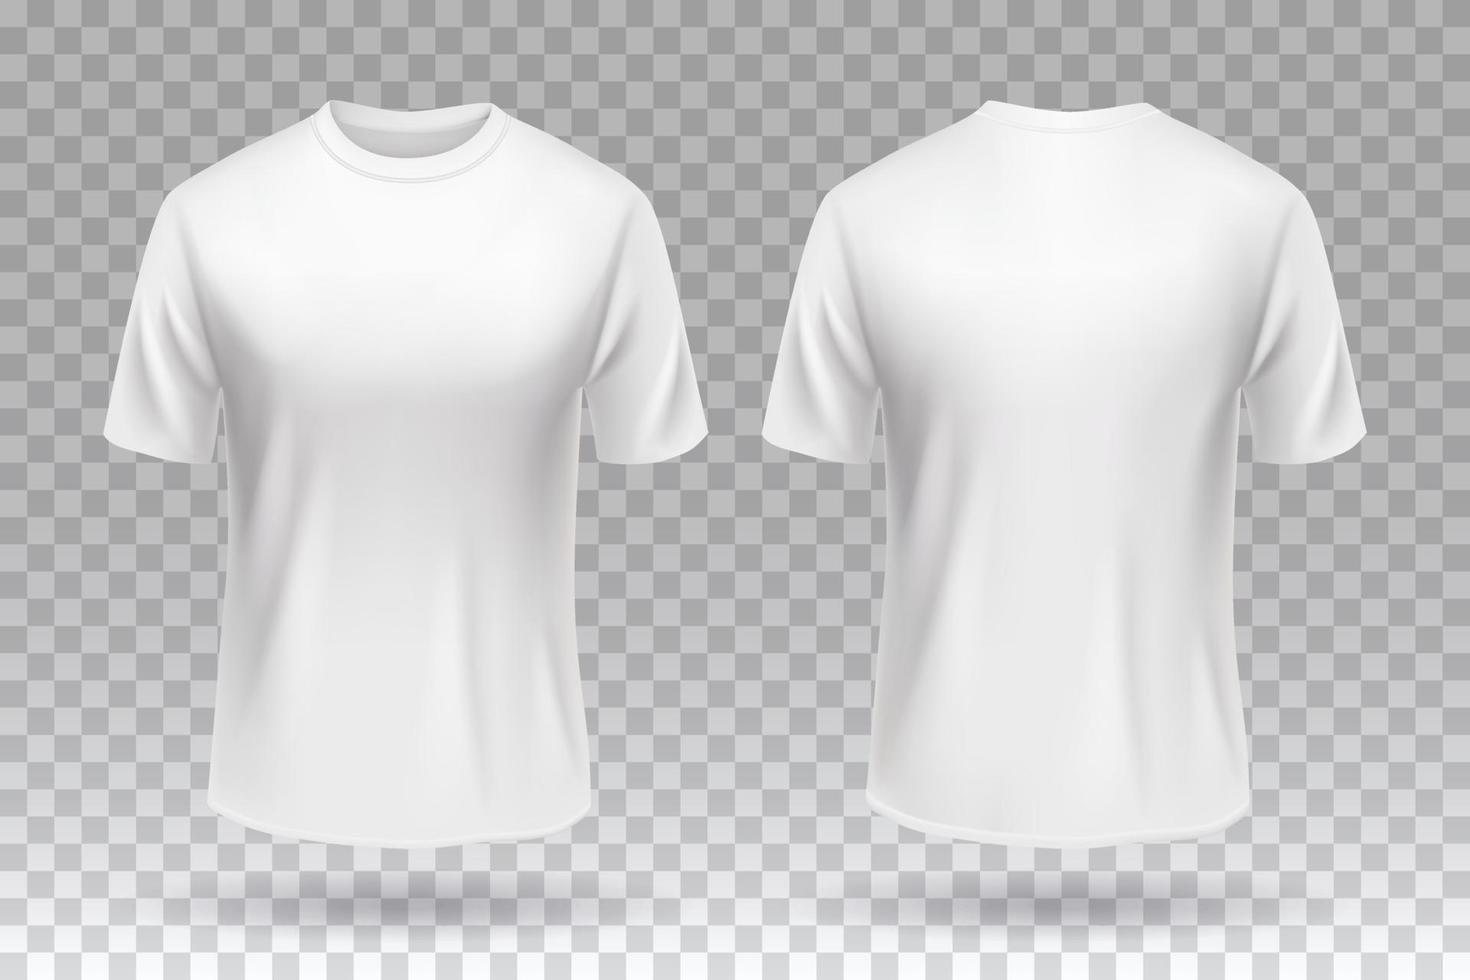 White blank T-shirt front and back template mockup design isolated